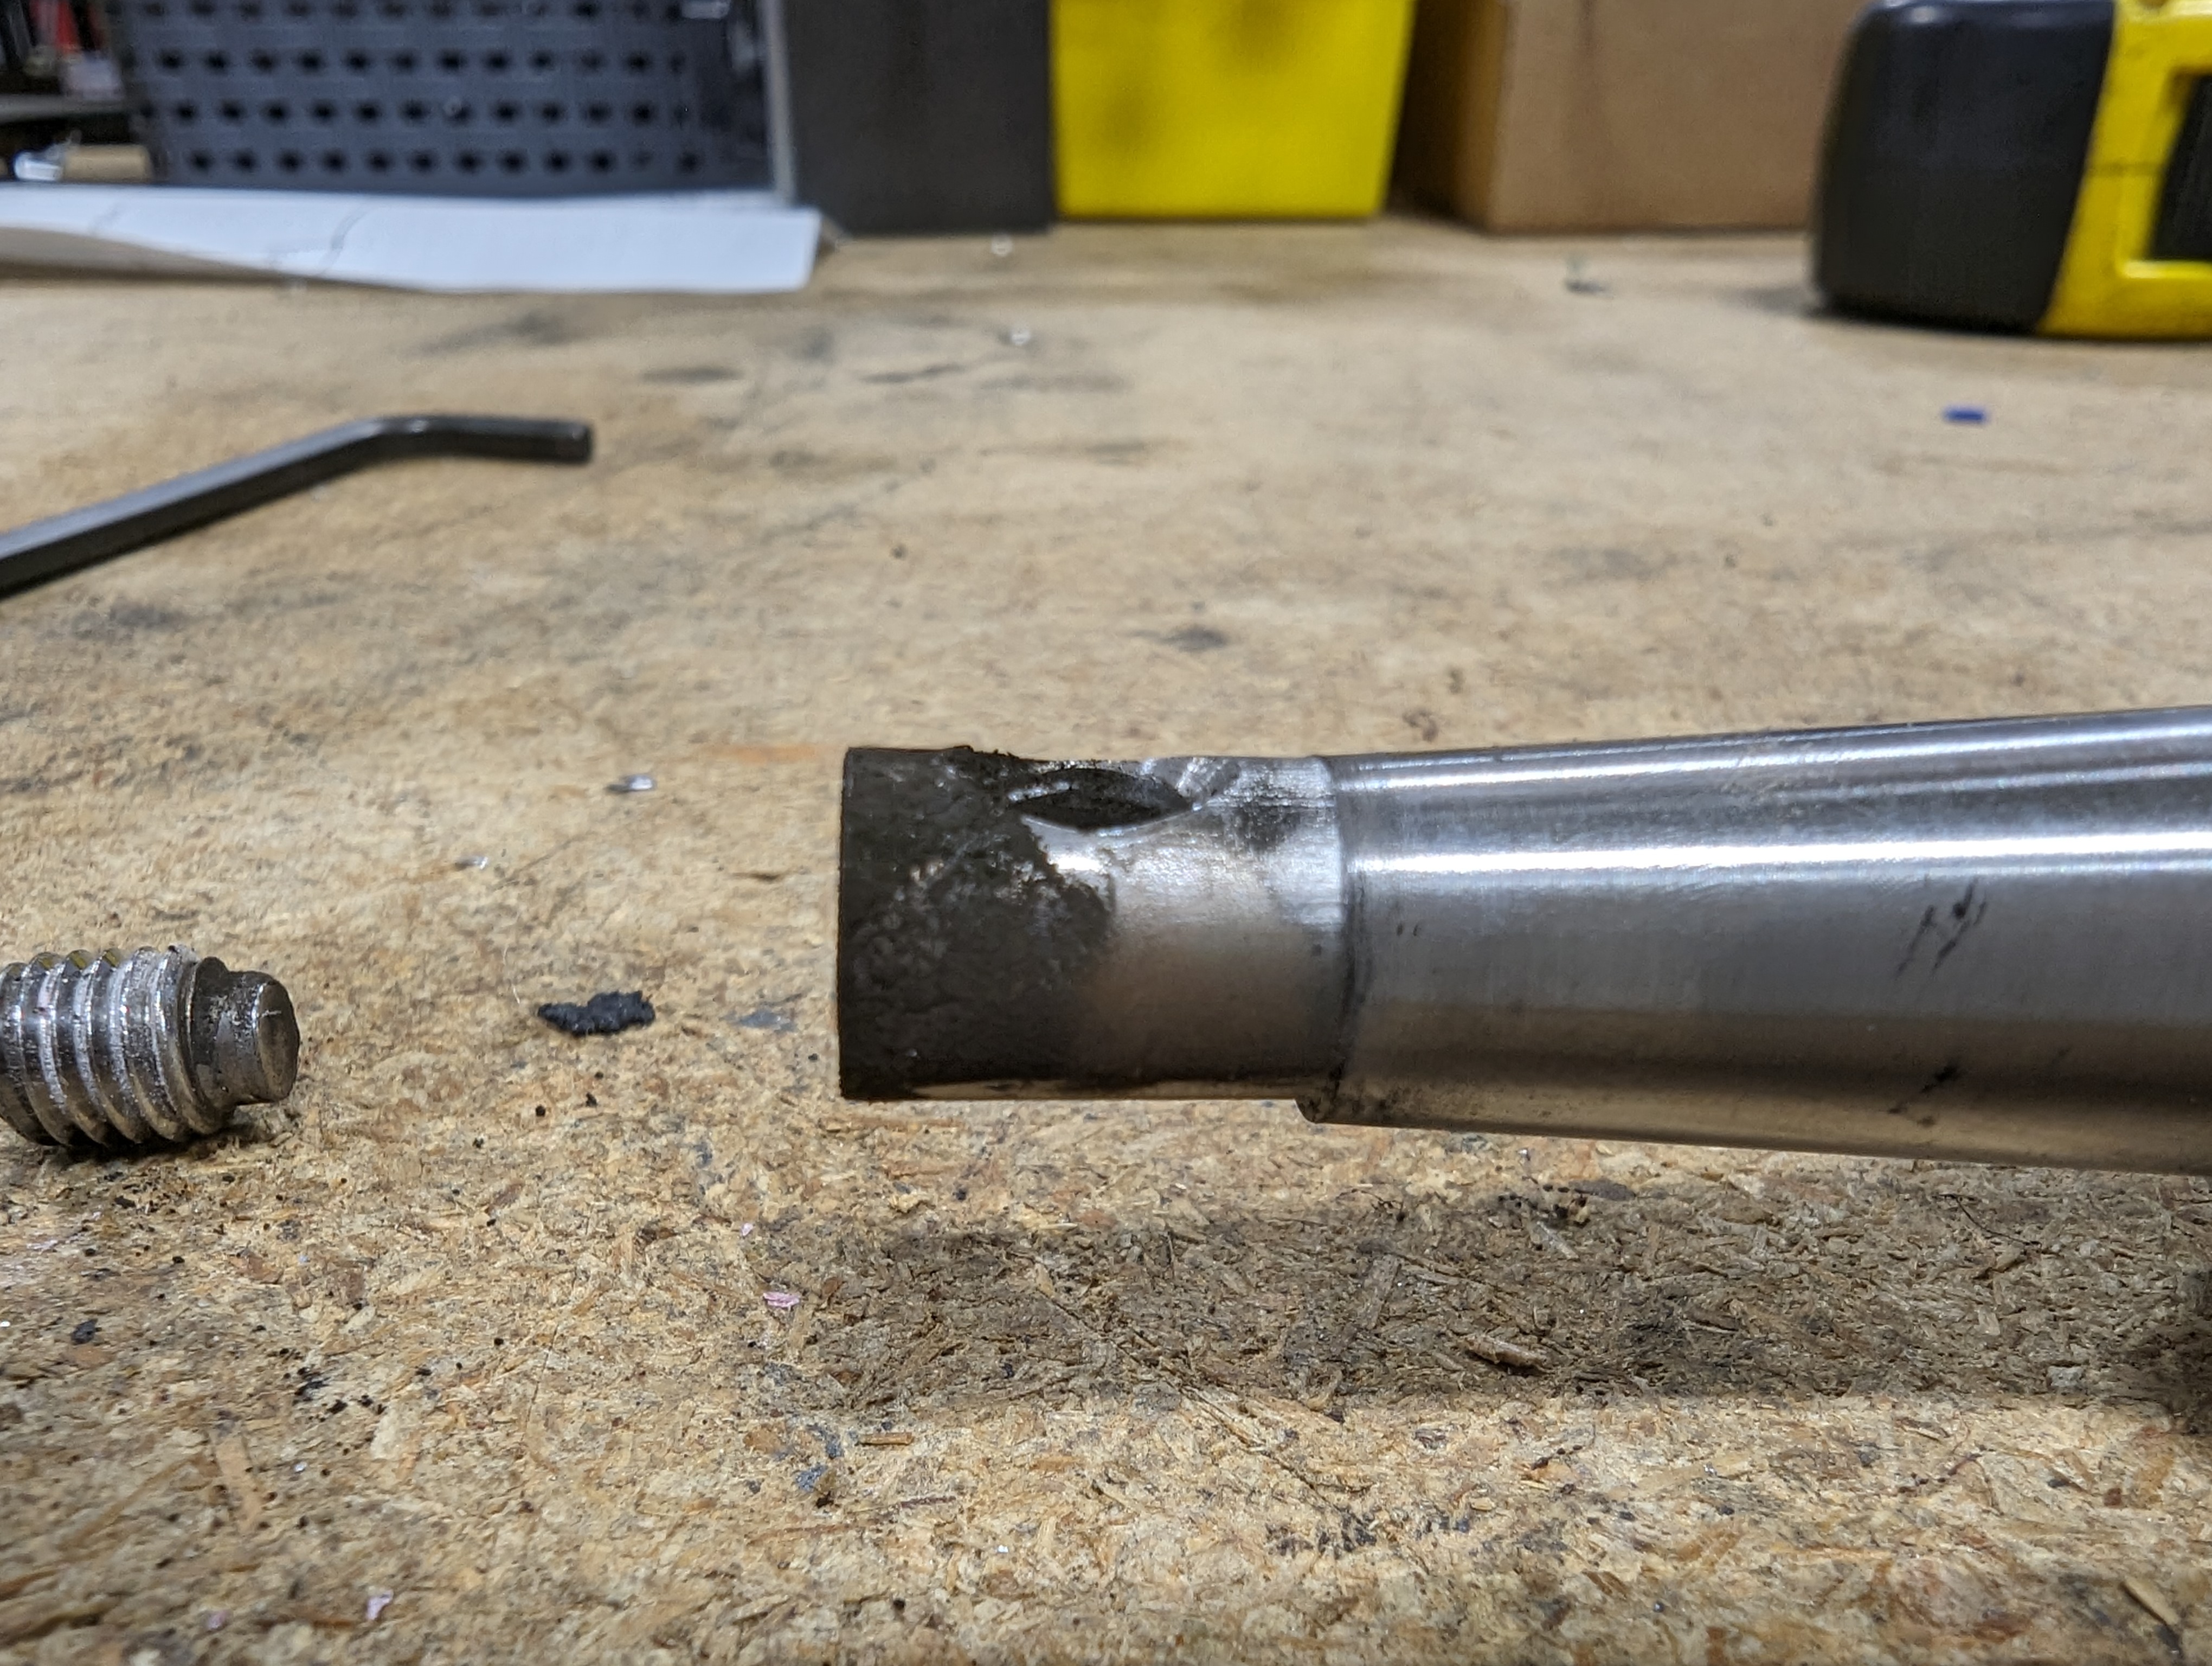 The bottom end of the shifter shaft, covered in a fine steel dust